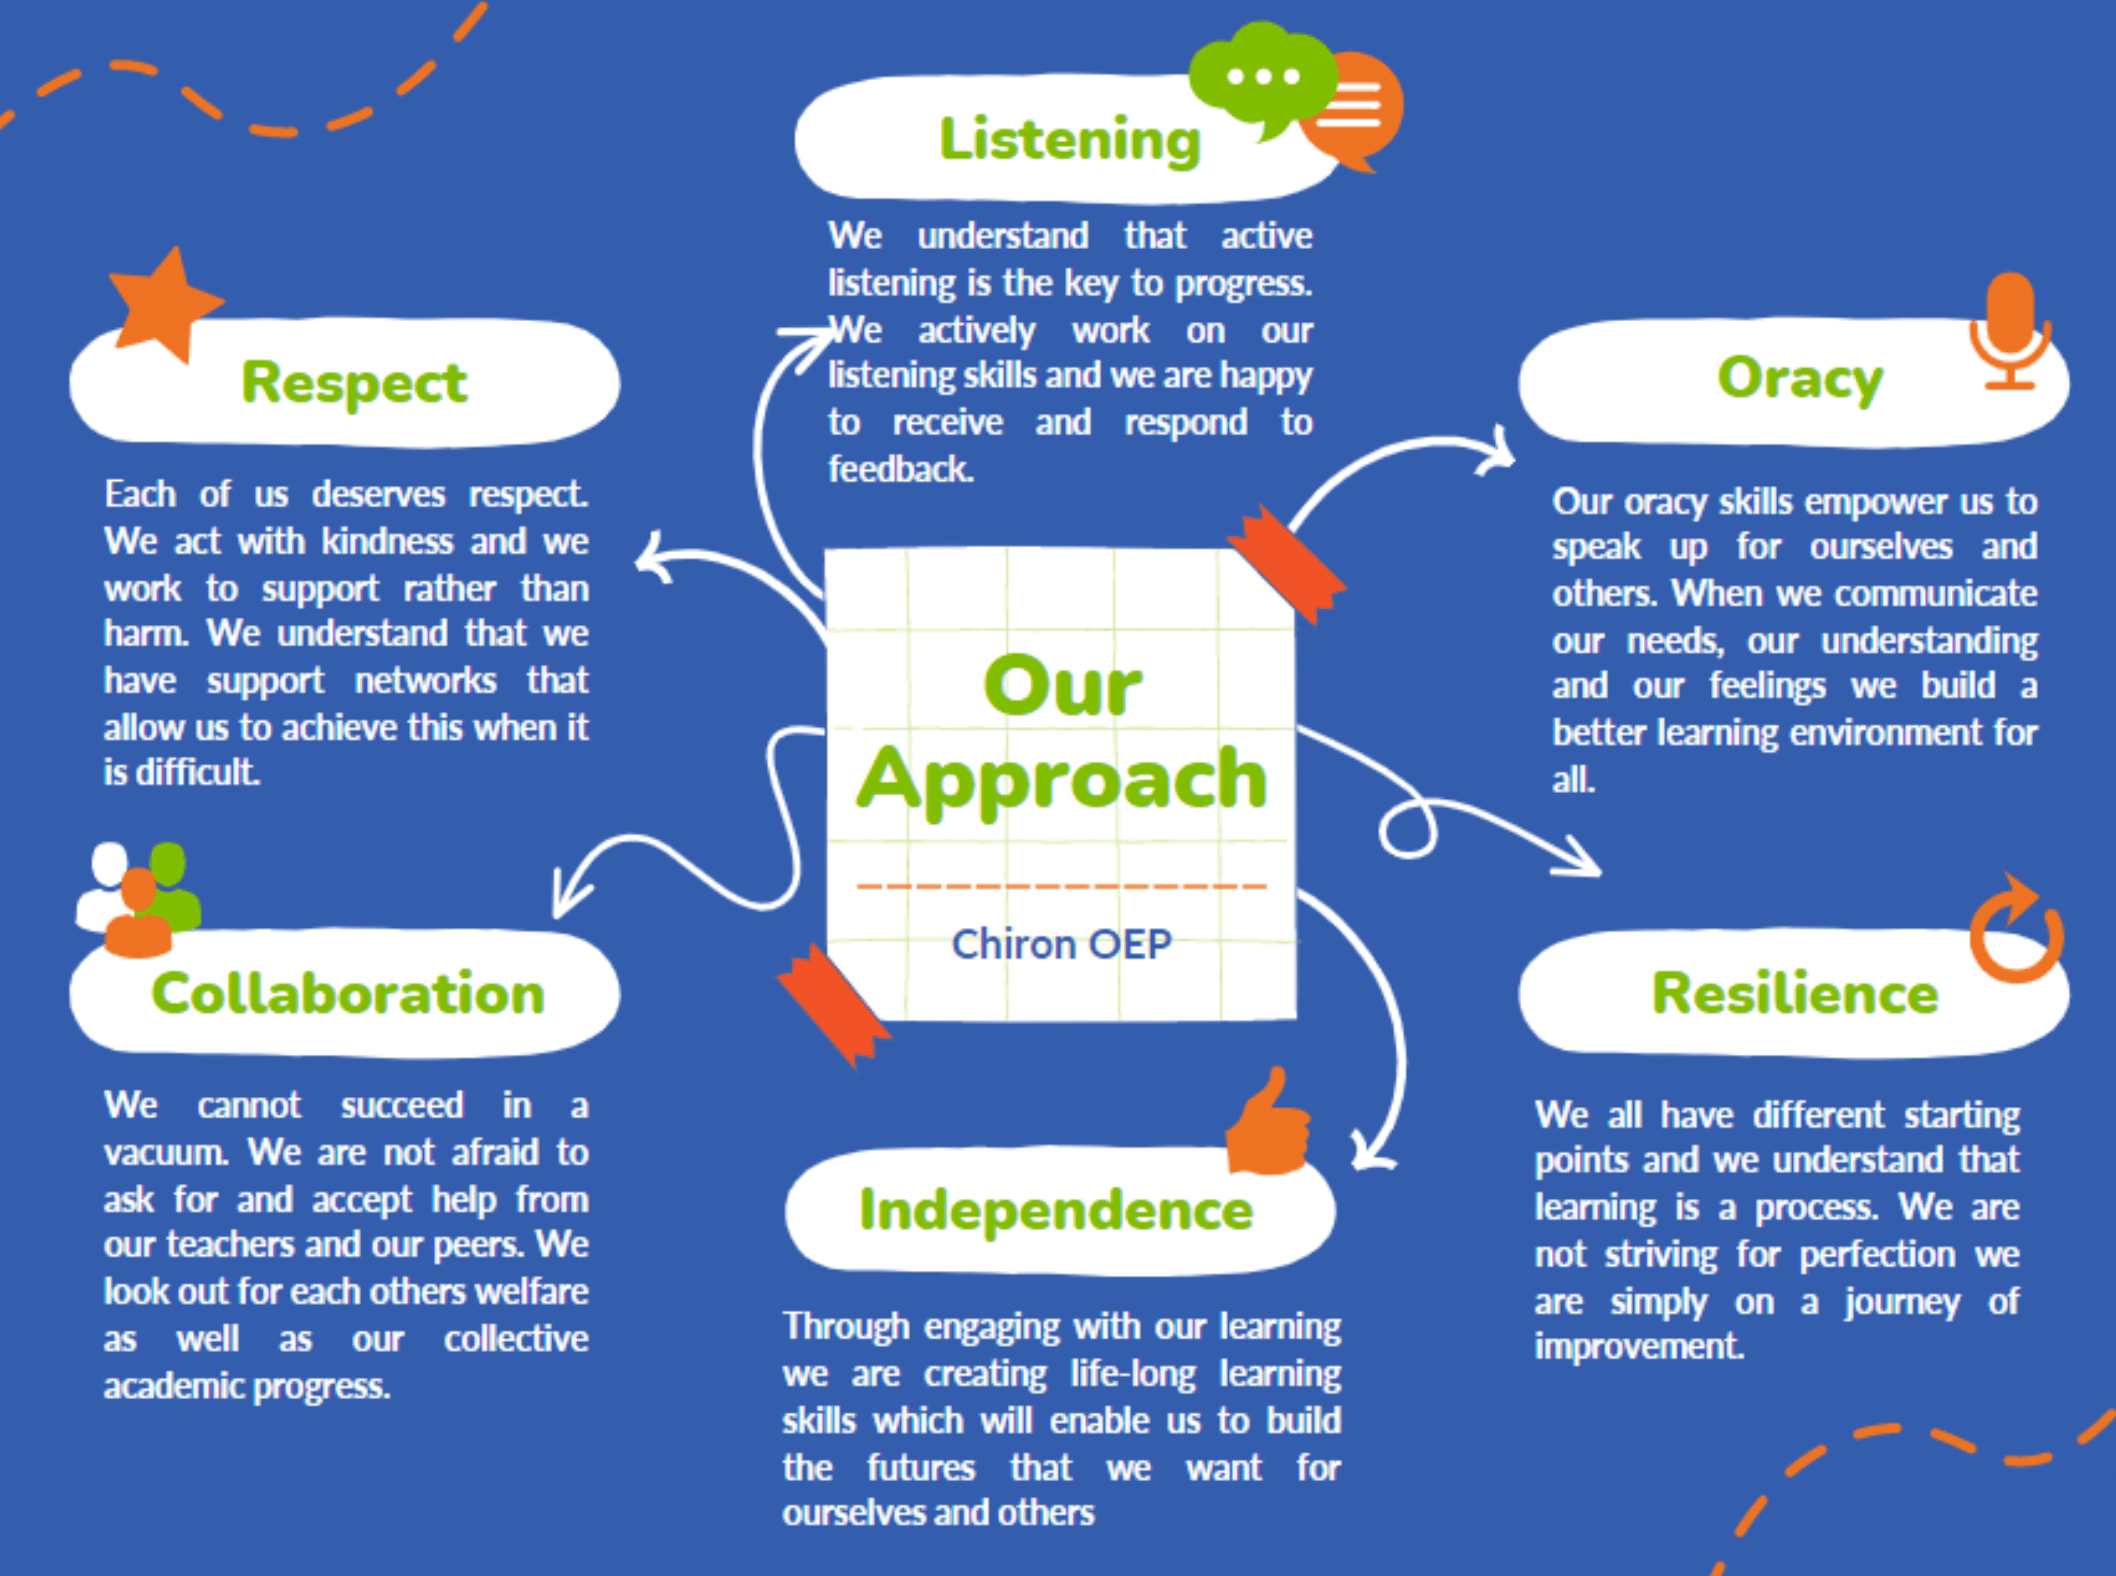 Our Approach graphic